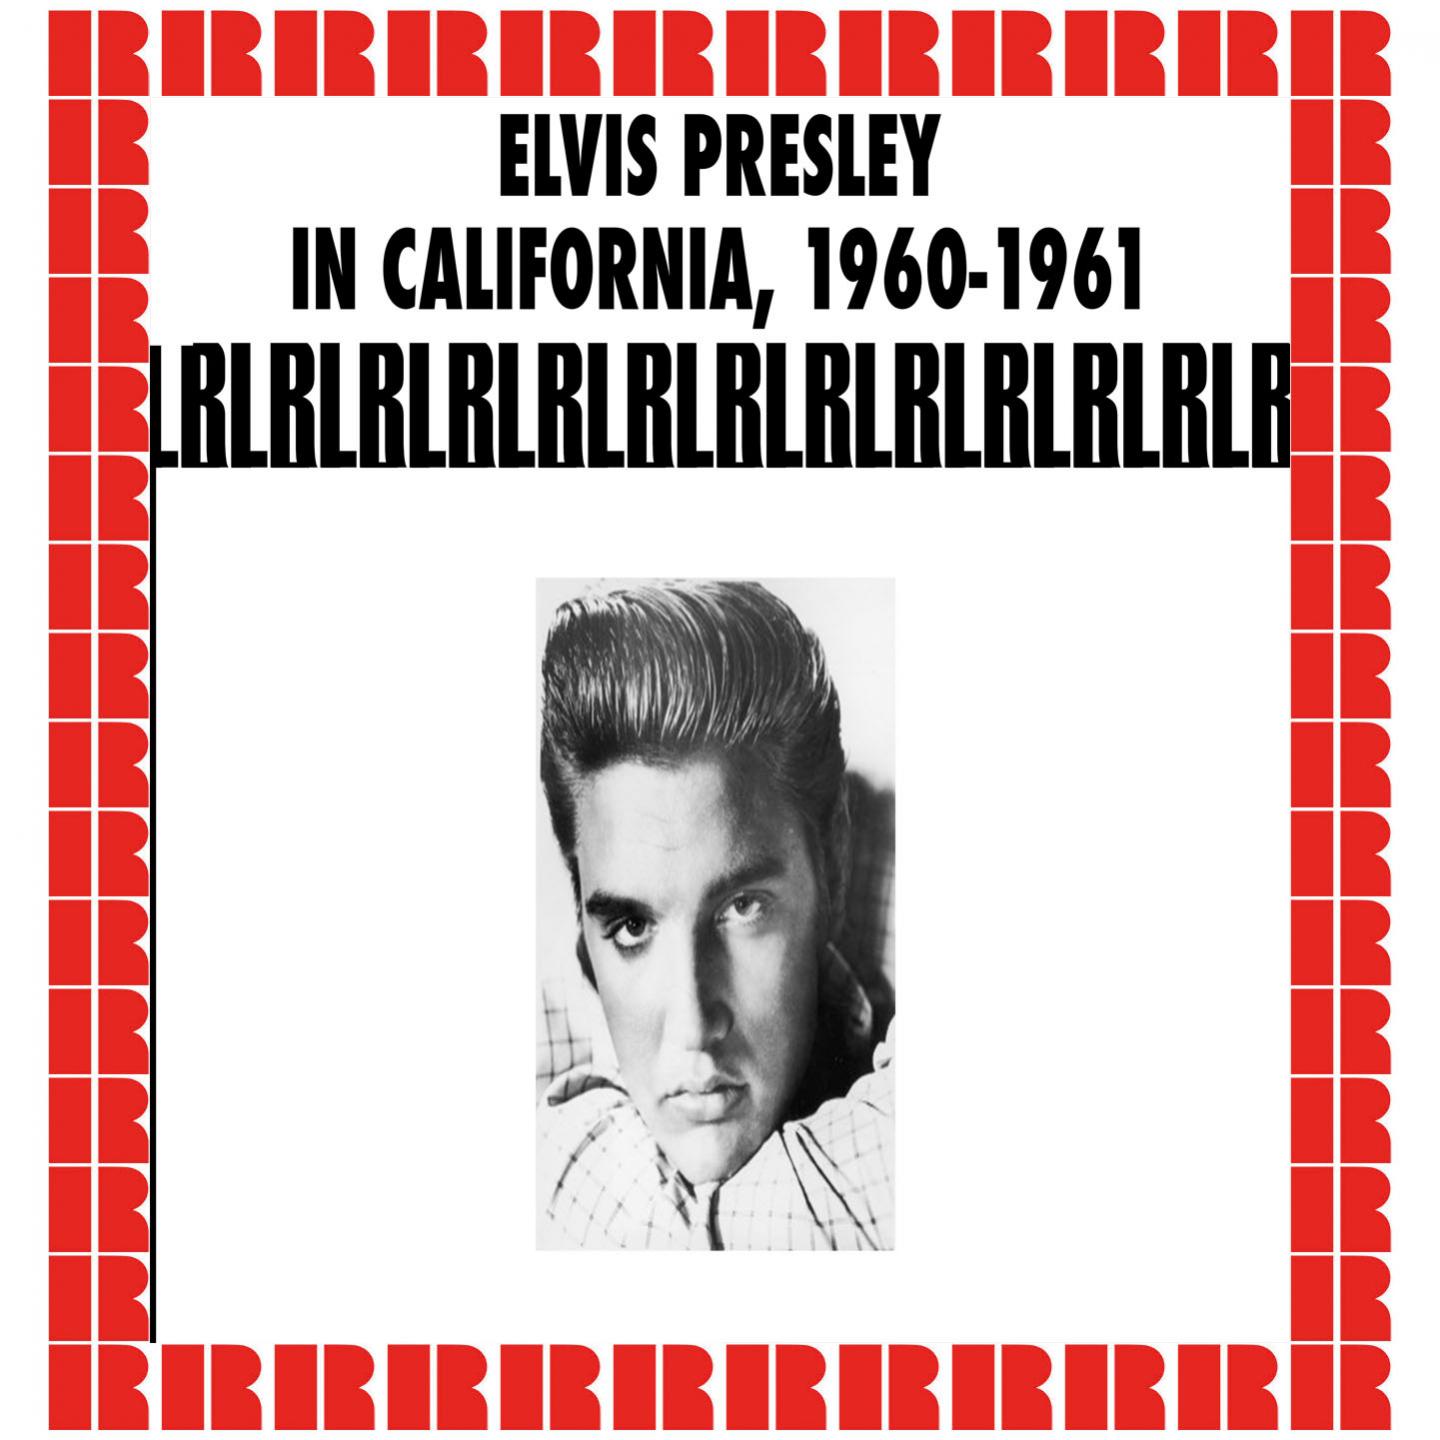 In California, Outtakes & Studio Rarities, 1960-1961 (Hd Remastered Edition)